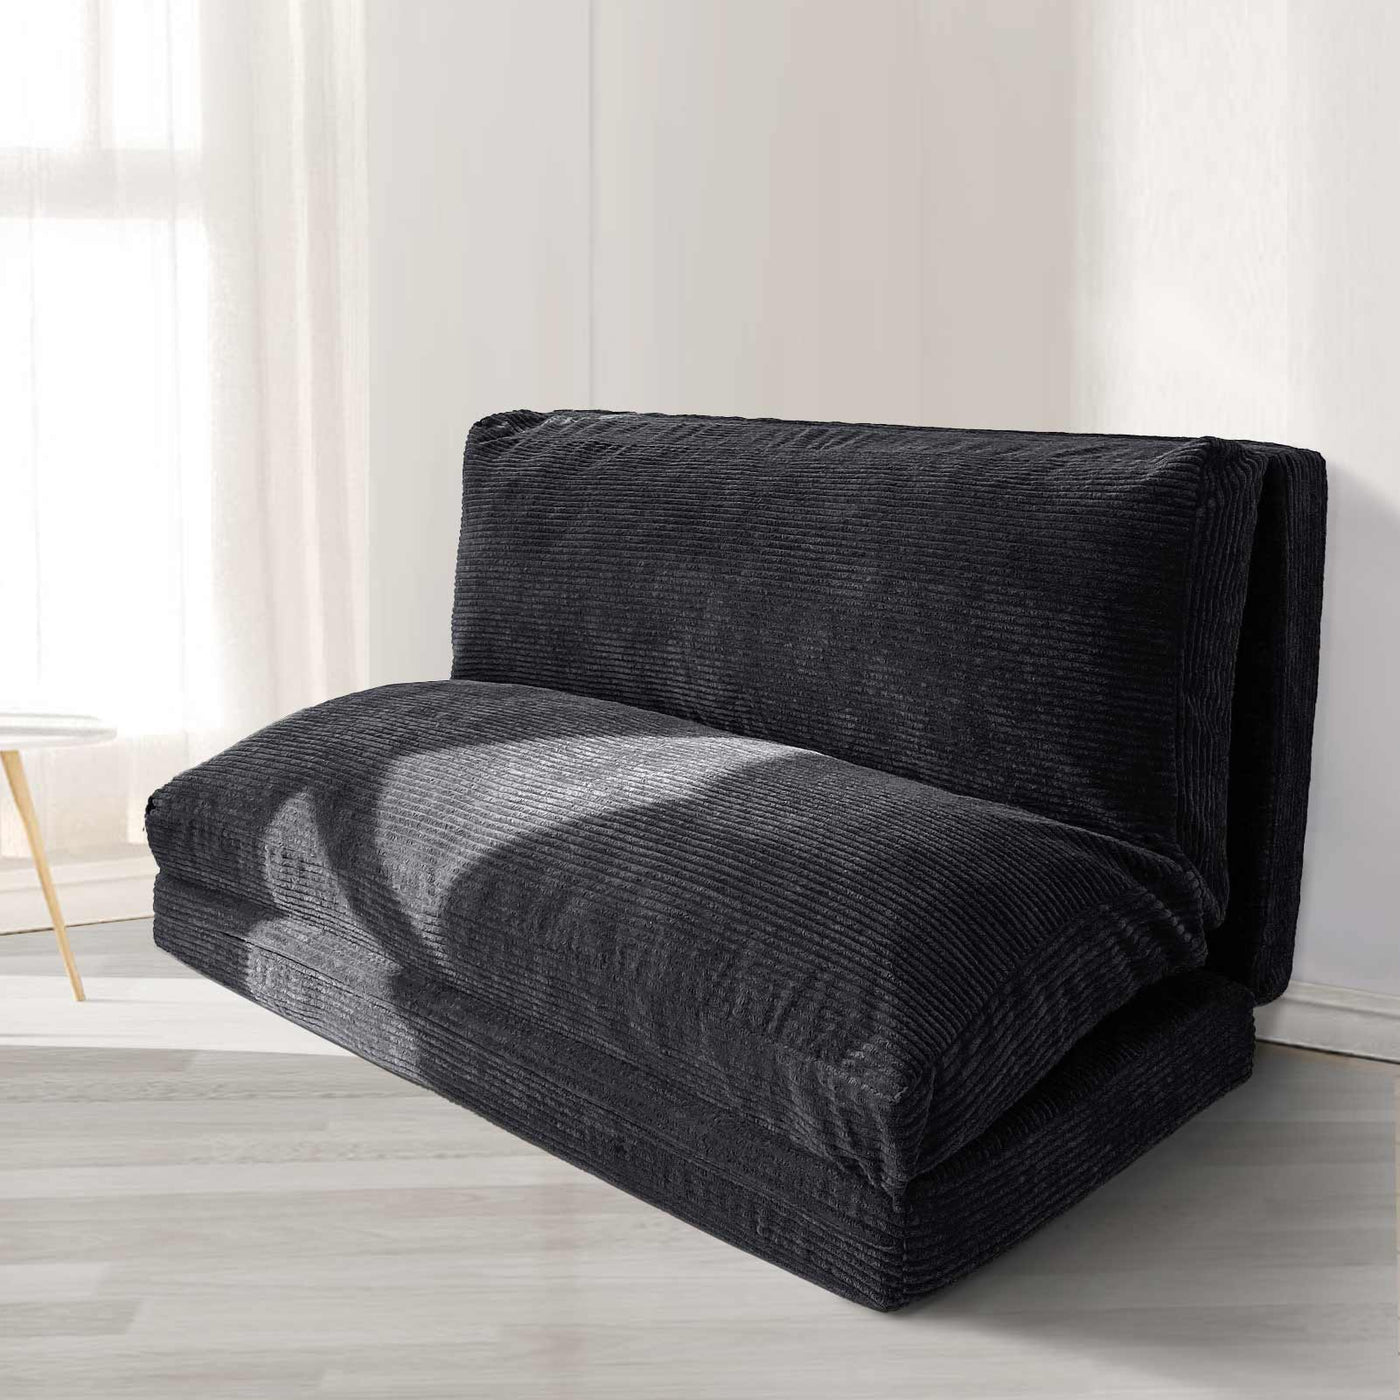 MAXYOYO Bean Bag Folding Sofa Bed with Corduroy Washable Cover, Extra Thick and Long Floor Sofa for Adults, Black